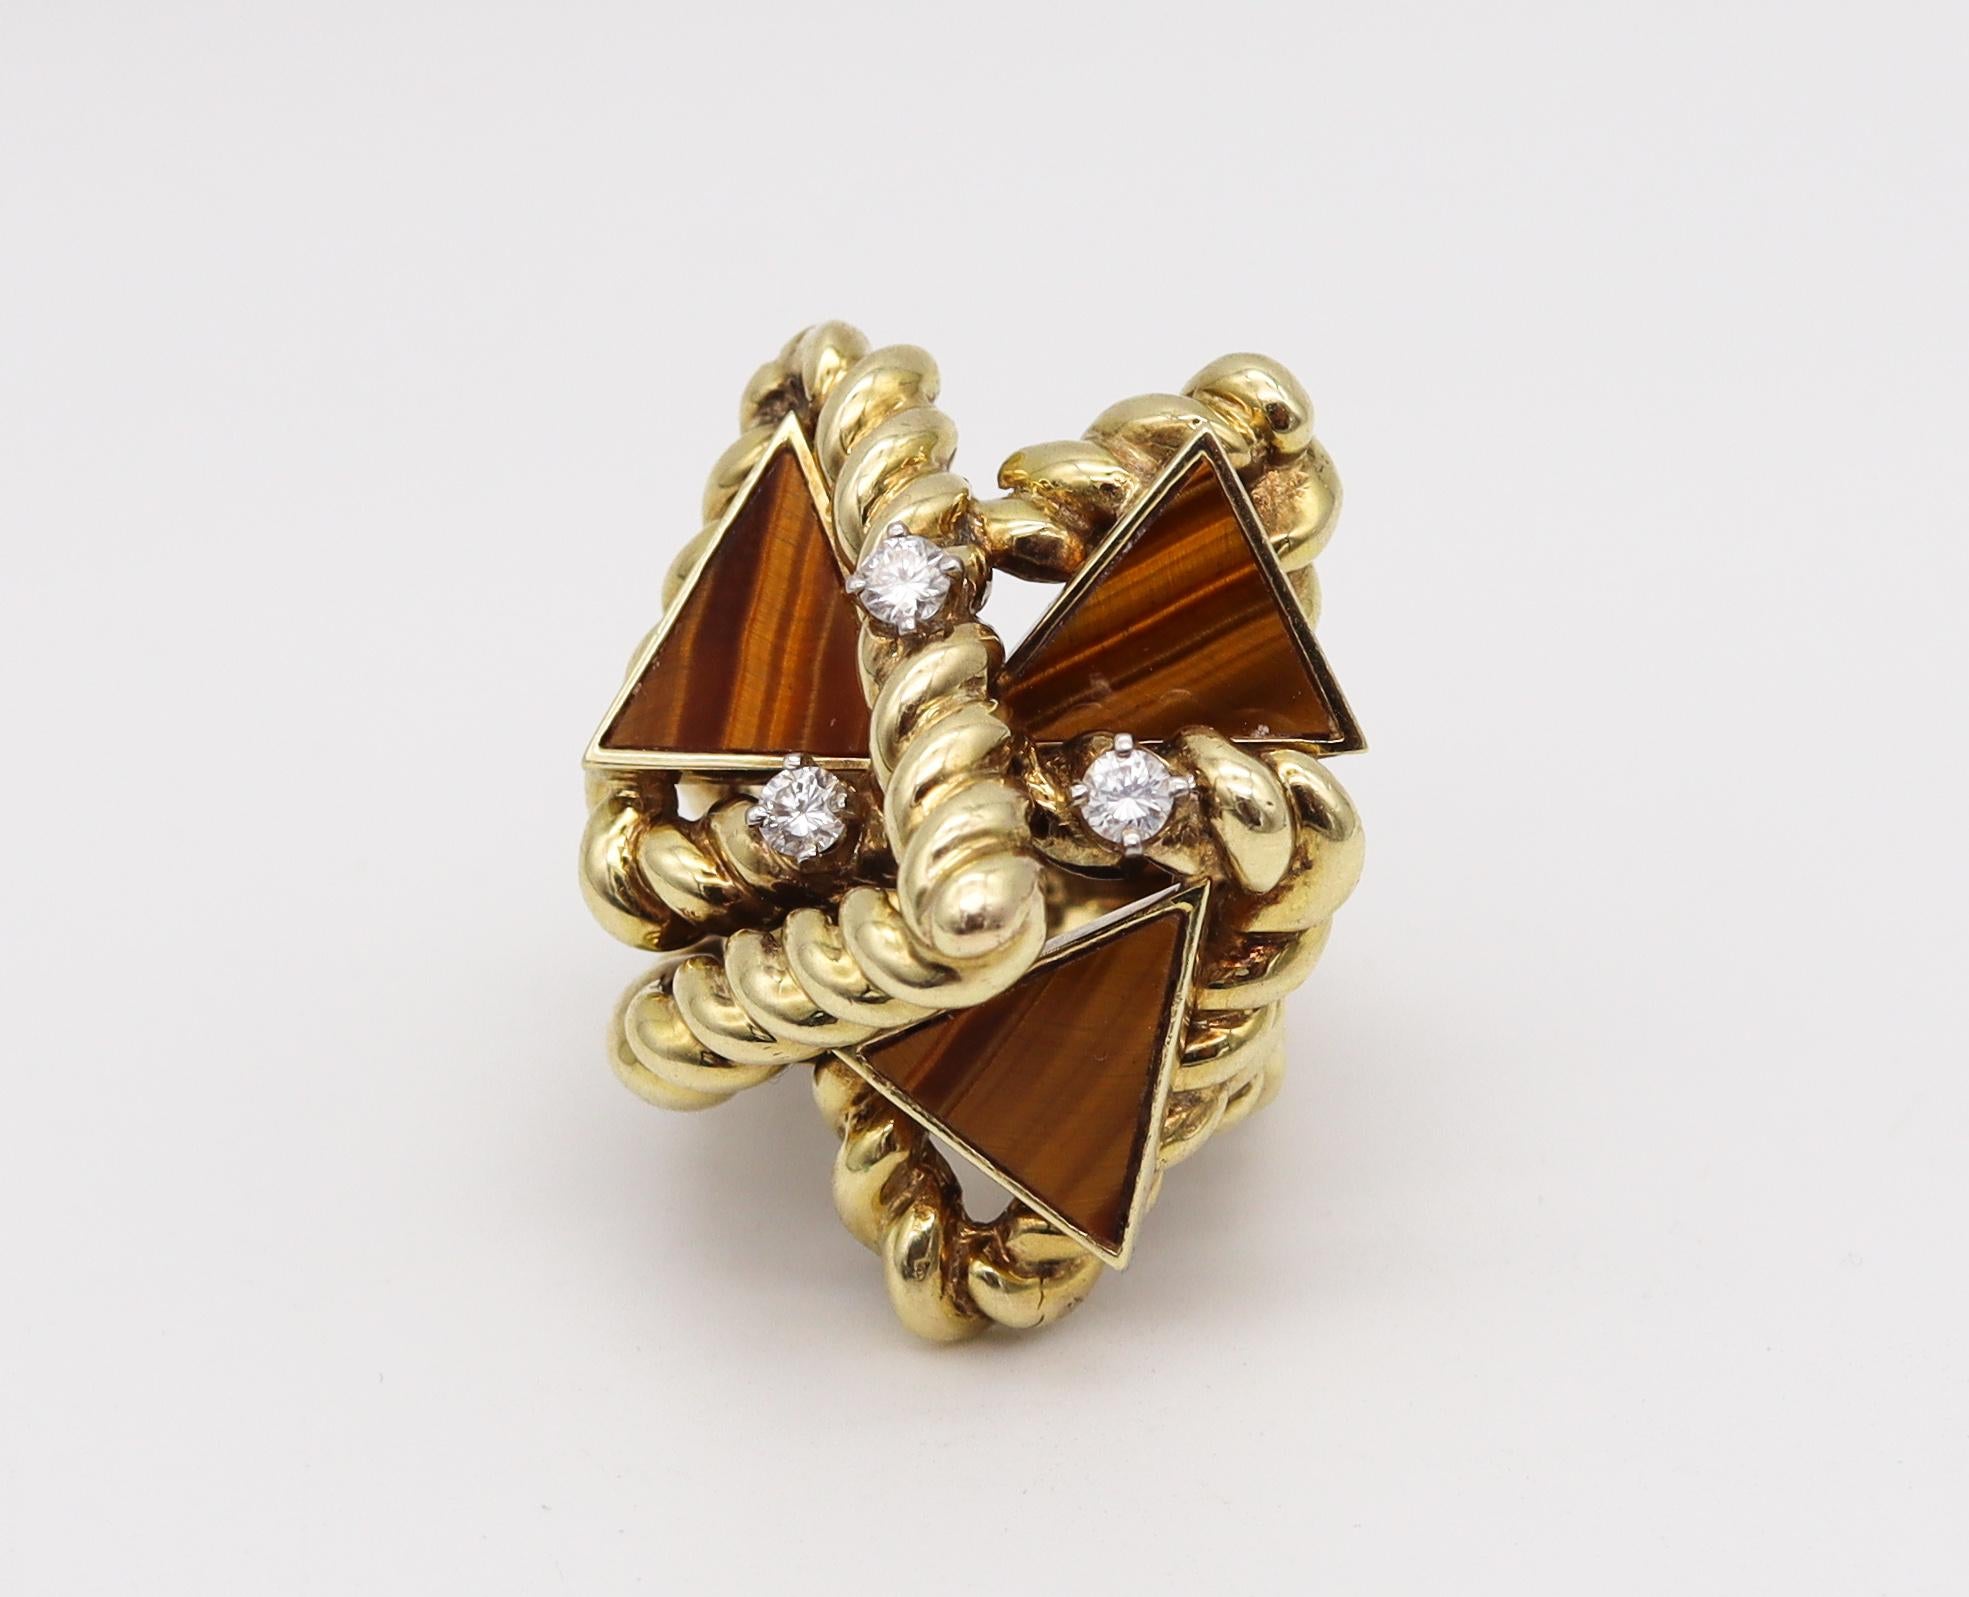 Geometric cocktail ring designed by La Triomphe.

A modernist three-dimensional sculptural piece, designed in New York city by the jewelry designer's La Triomphe, back in the early 1970's. This bold geometric cocktail ring has been crafted with